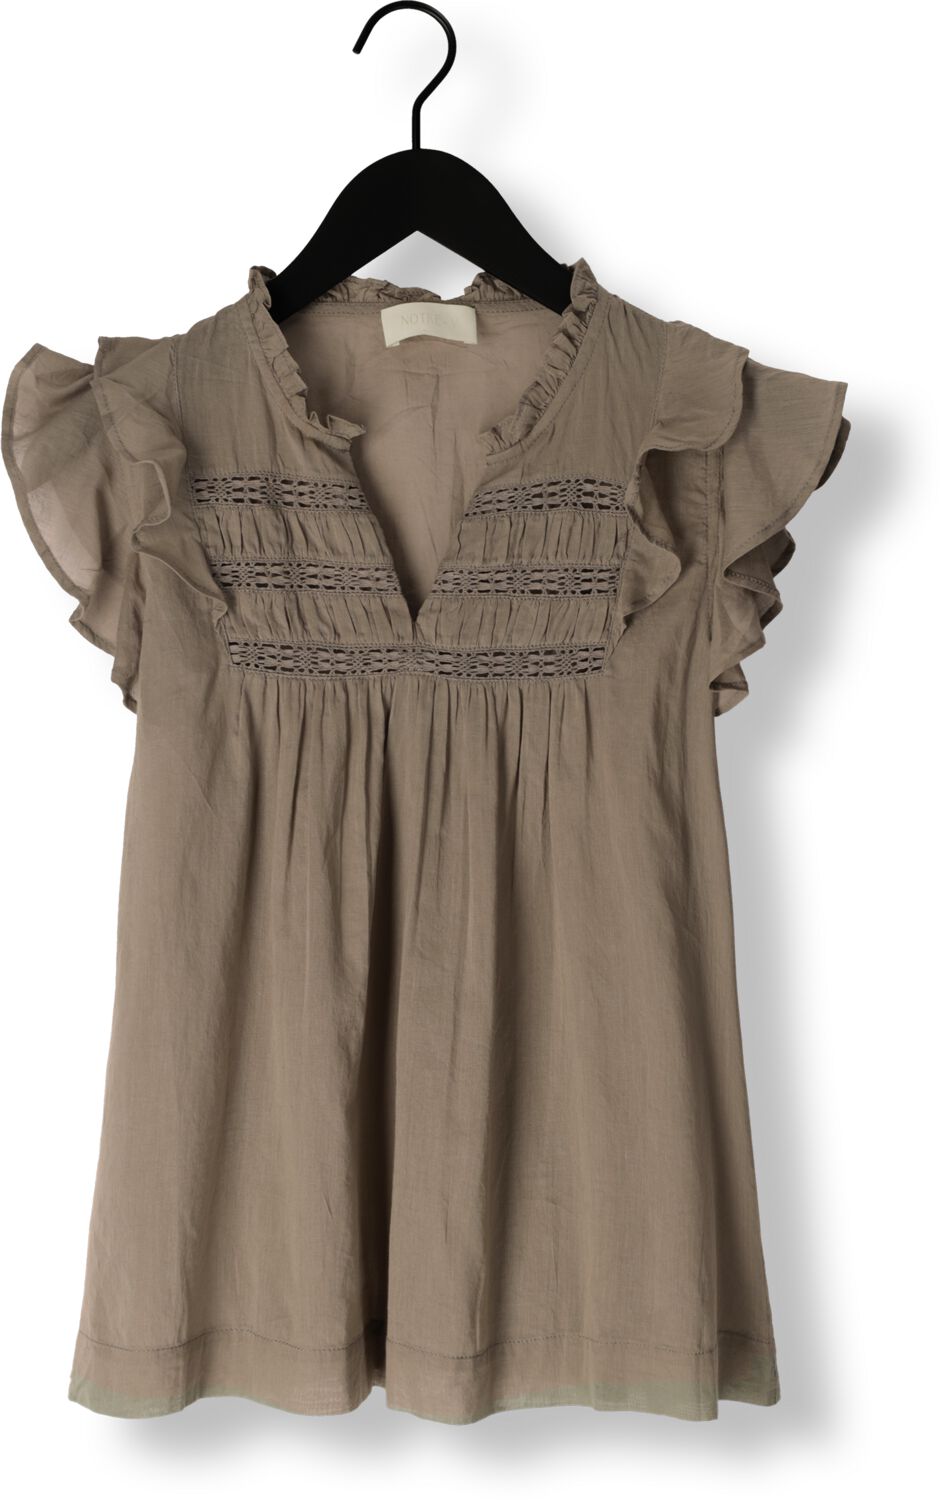 NOTRE-V Dames Tops & T-shirts Voile Top Short Sleeves Taupe